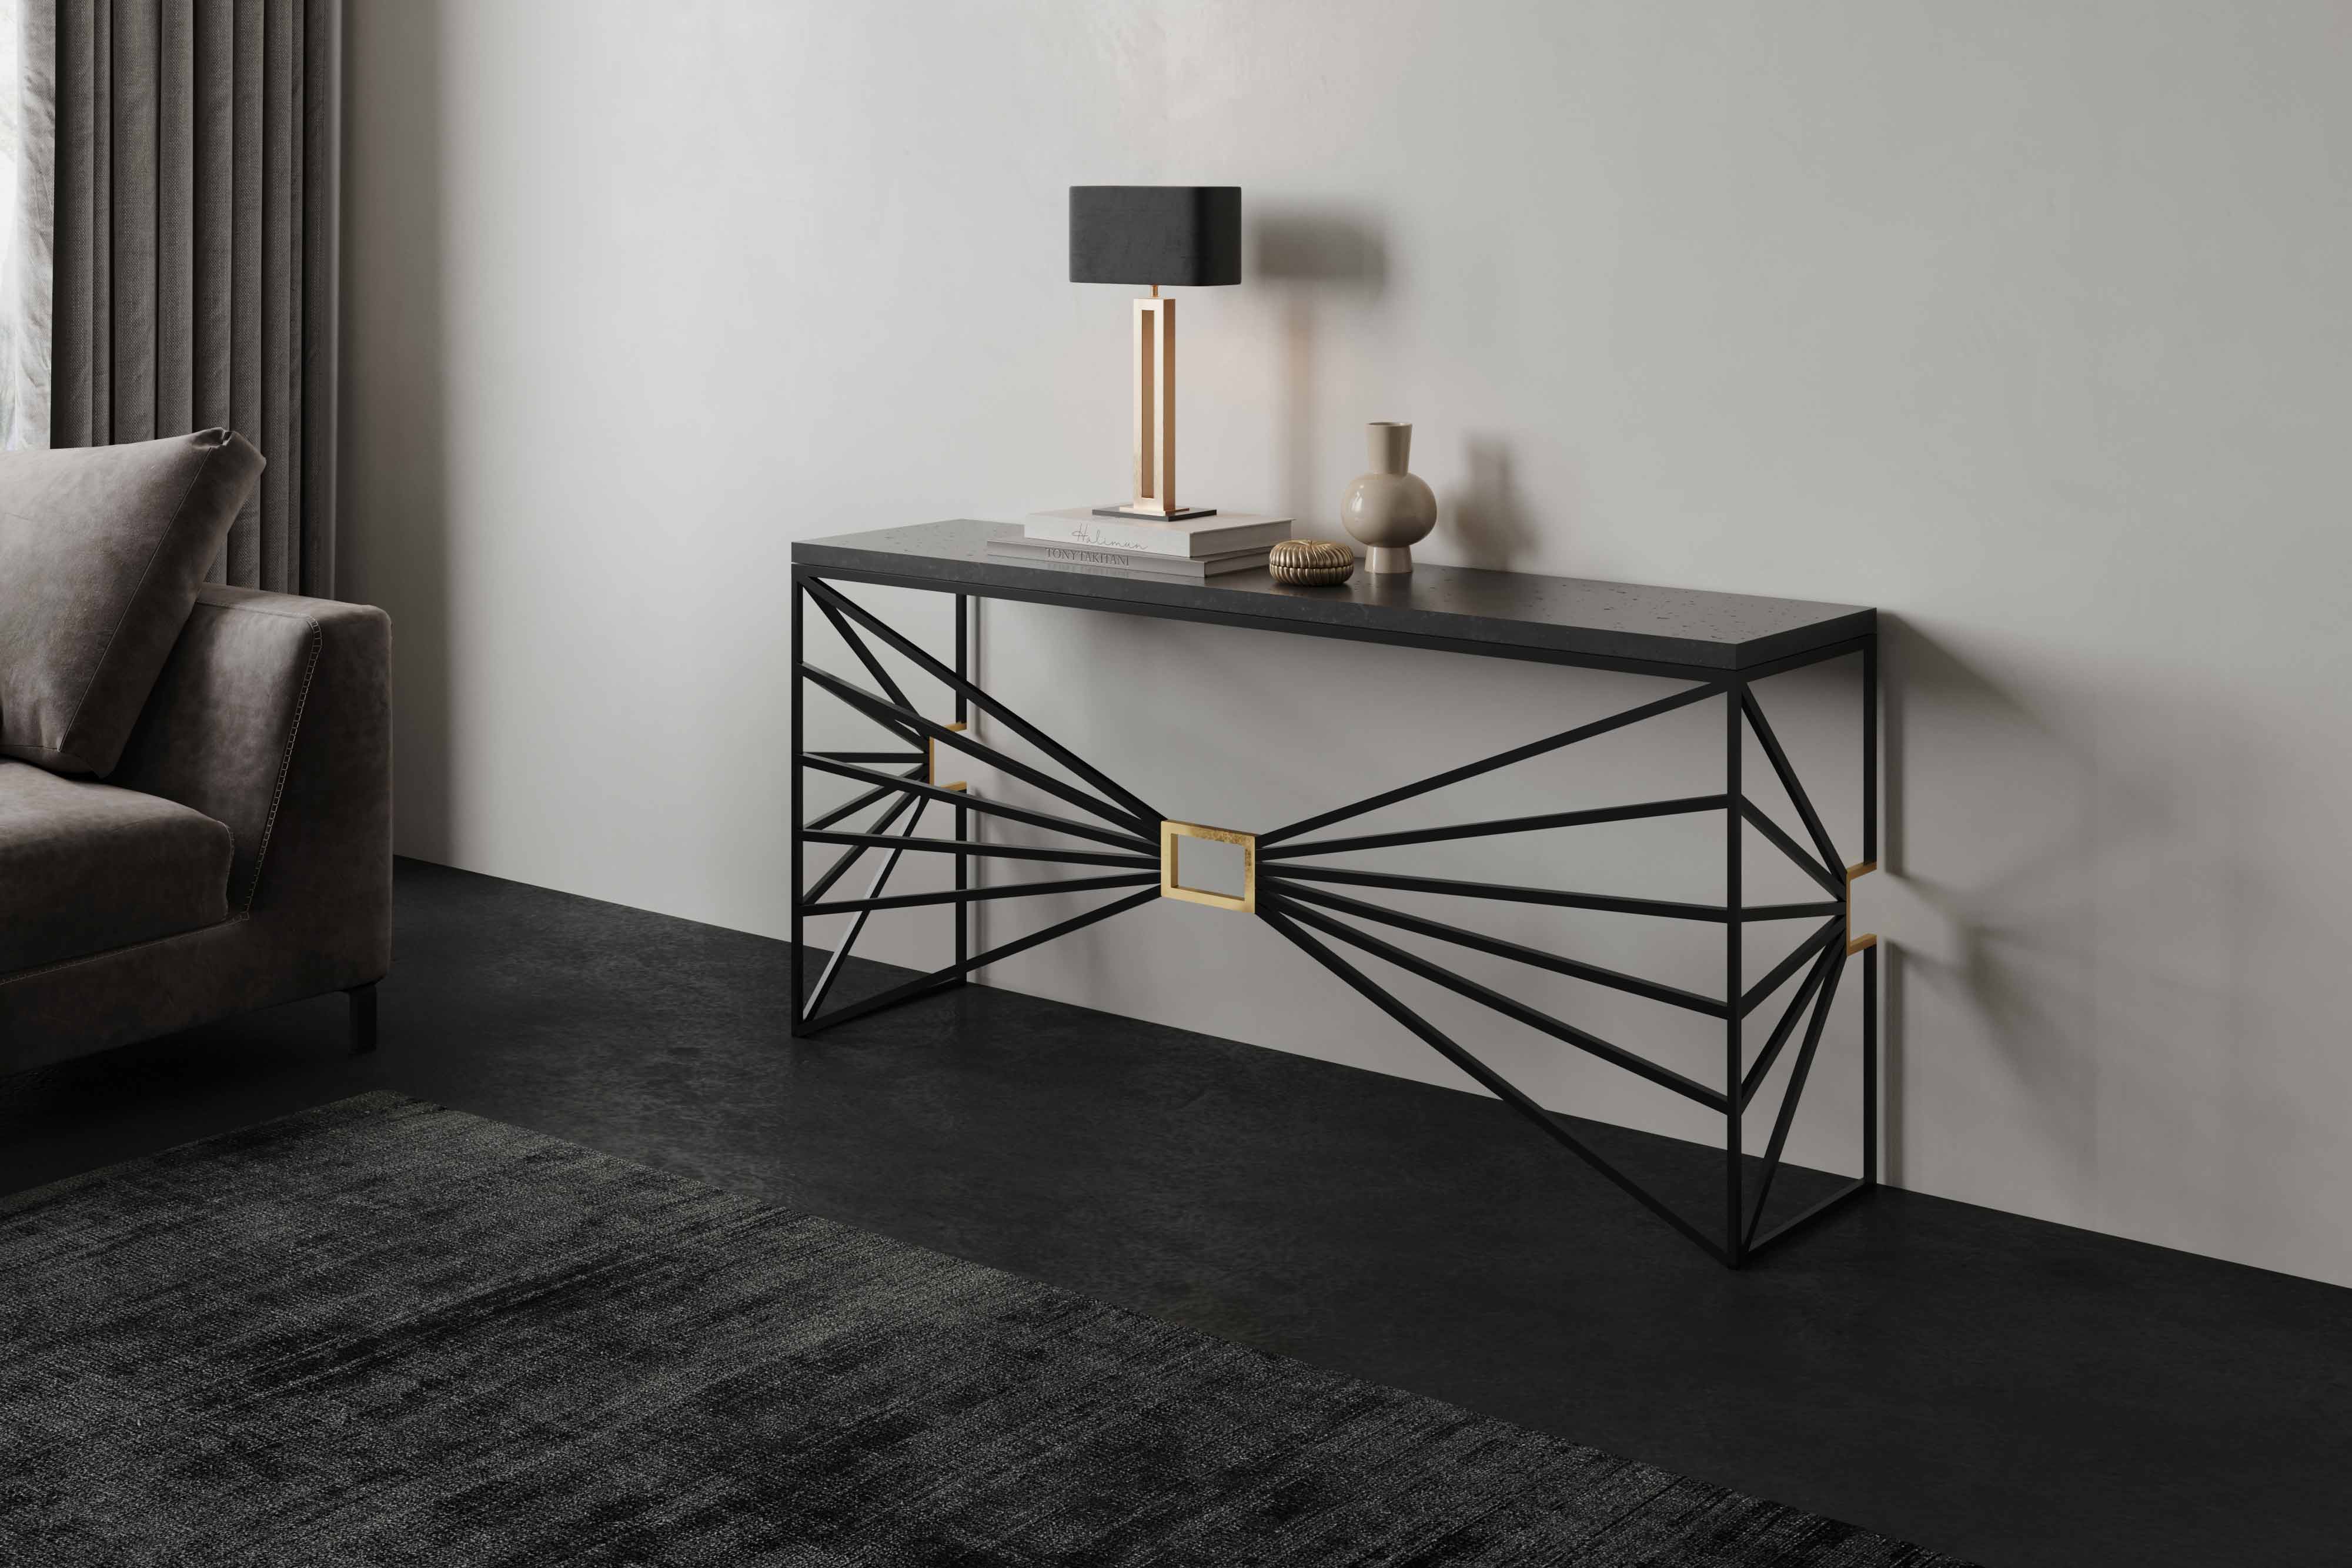 CO33 exclusive console table SOLIS black gold made of concrete and steel lacquered, refined with gold leaf